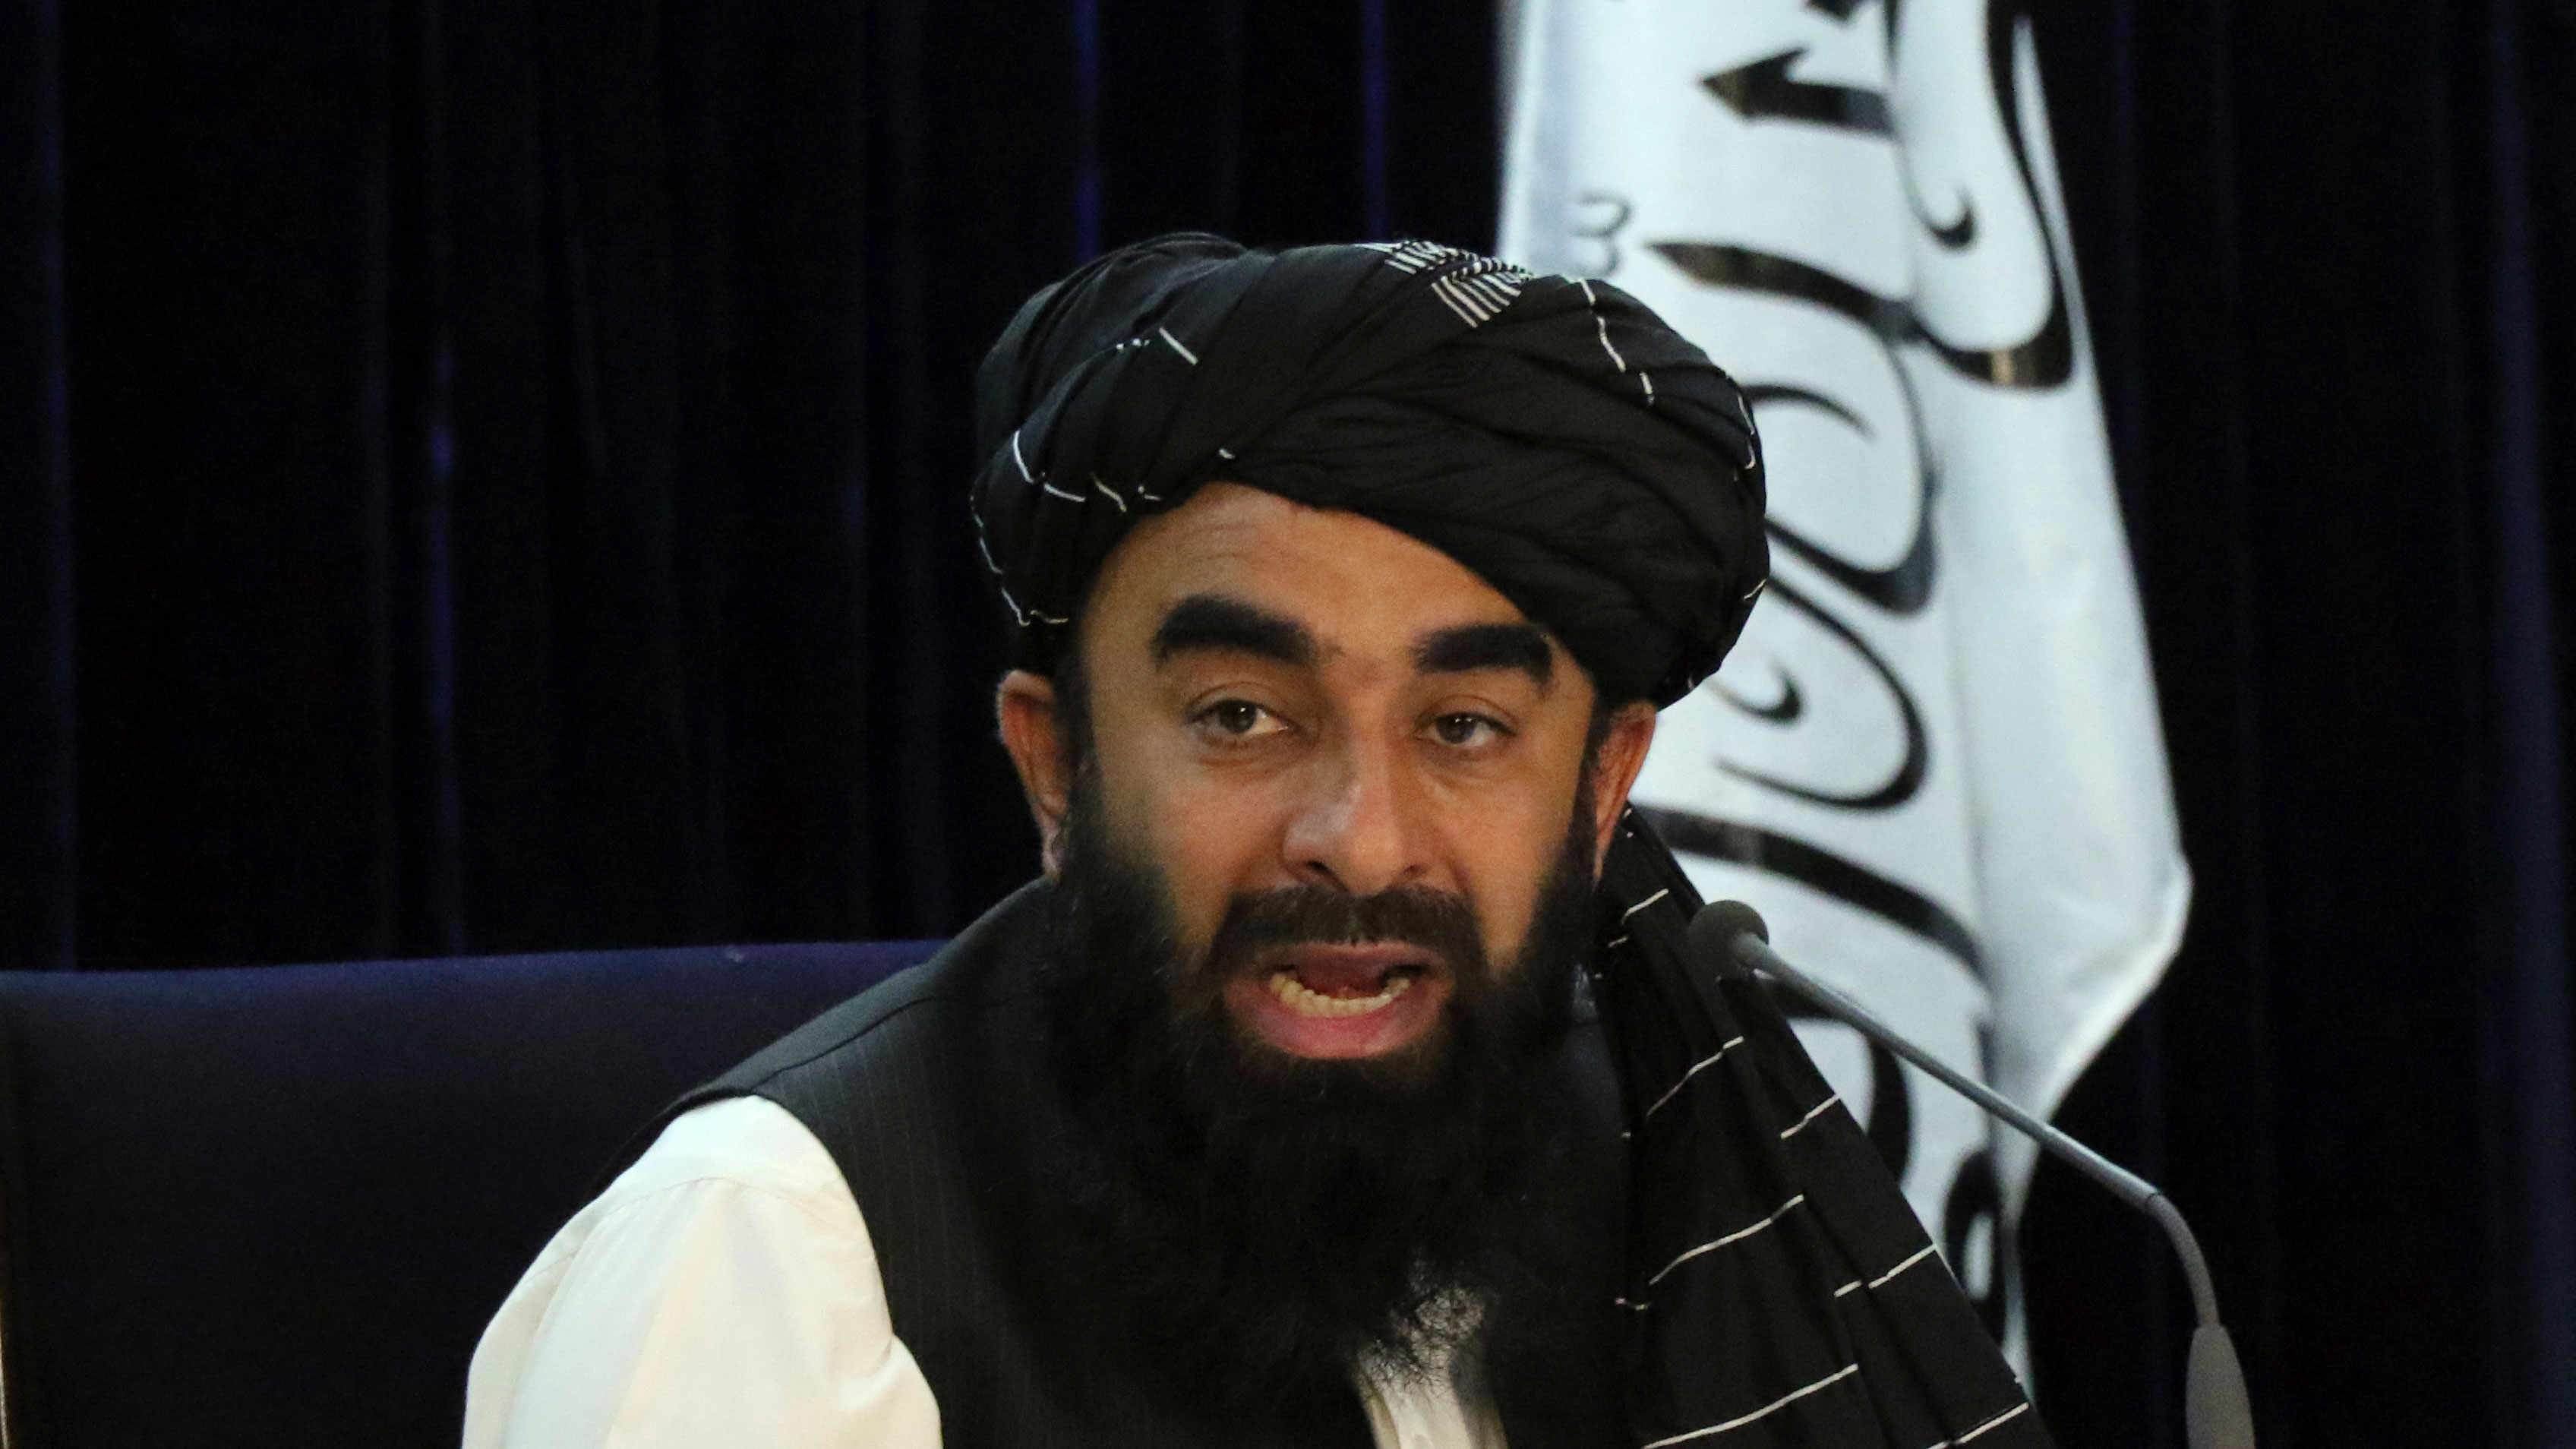 Taliban spokesman Zabihullah Mujahid speaks during a press conference in Kabul. The Taliban have announced a caretaker Cabinet stacked with veterans of their harsh rule in the late 1990s.